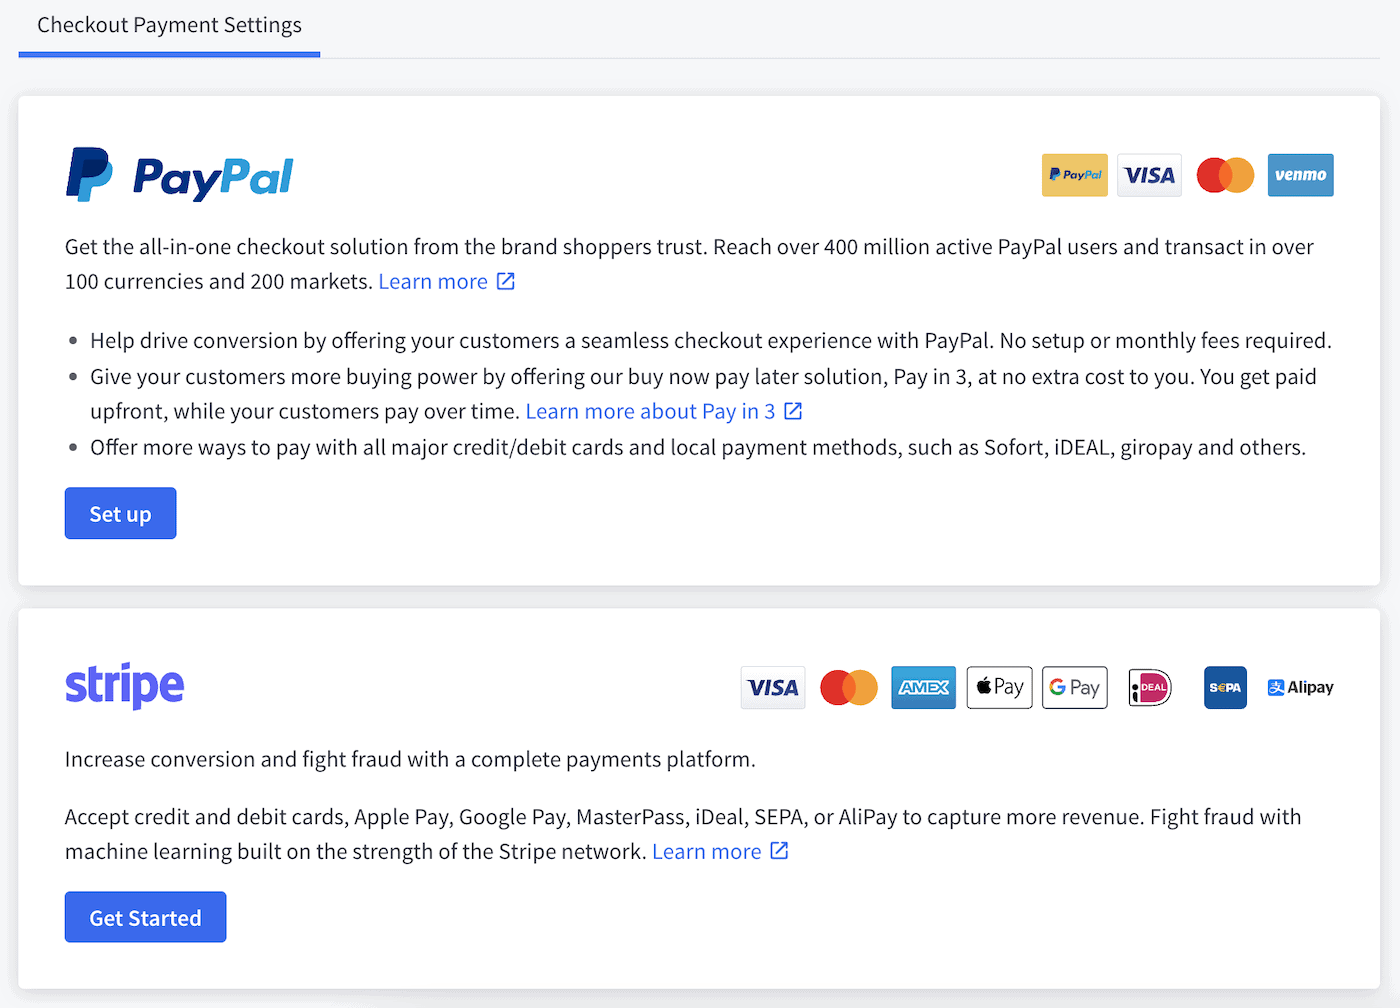 PayPal and Stripe are the default payment options in BigCommerce